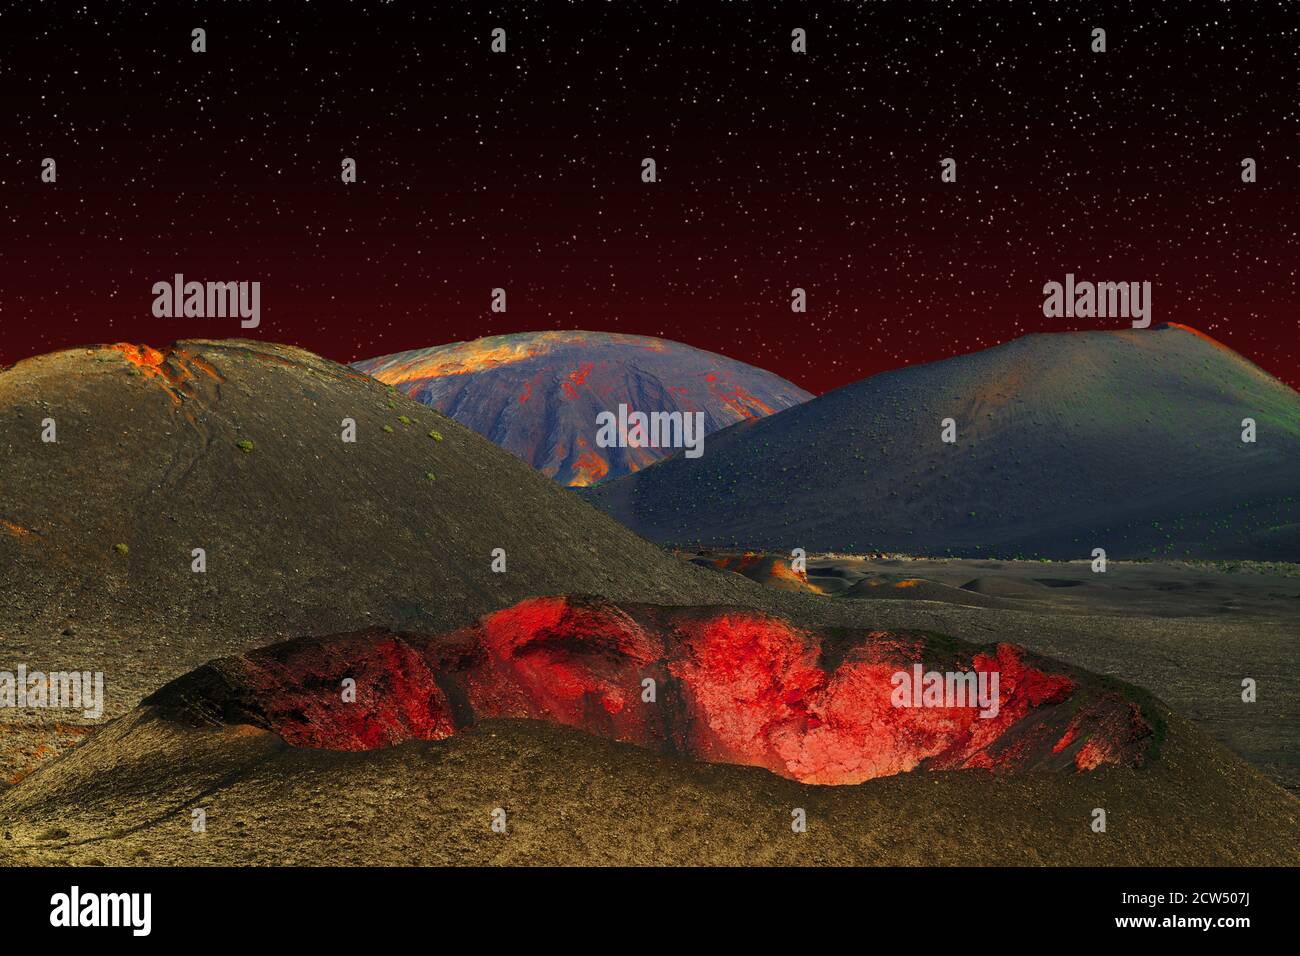 This fantasy volcanic world is based on the volcanic landscape of Lanzarote (Canary Islands). Stock Photo